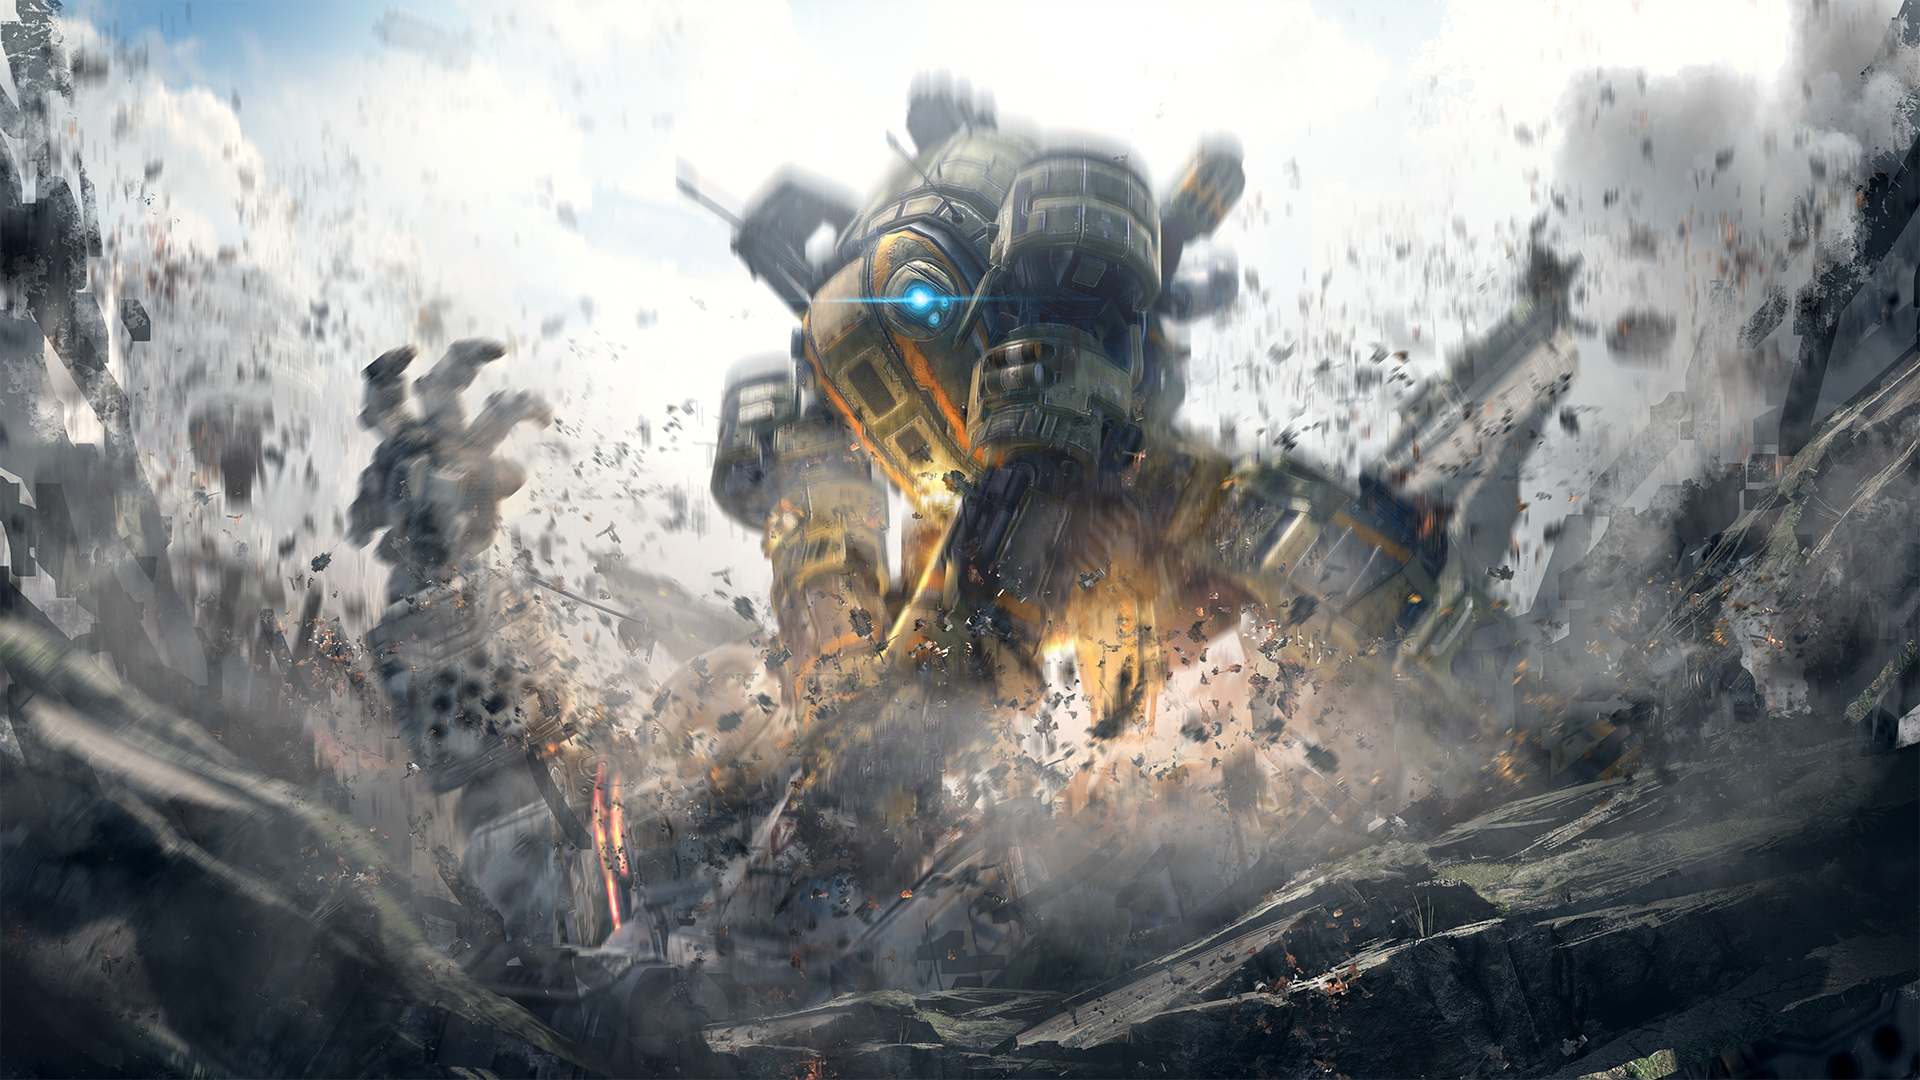 General 1920x1080 Titanfall video games PC gaming video game art science fiction